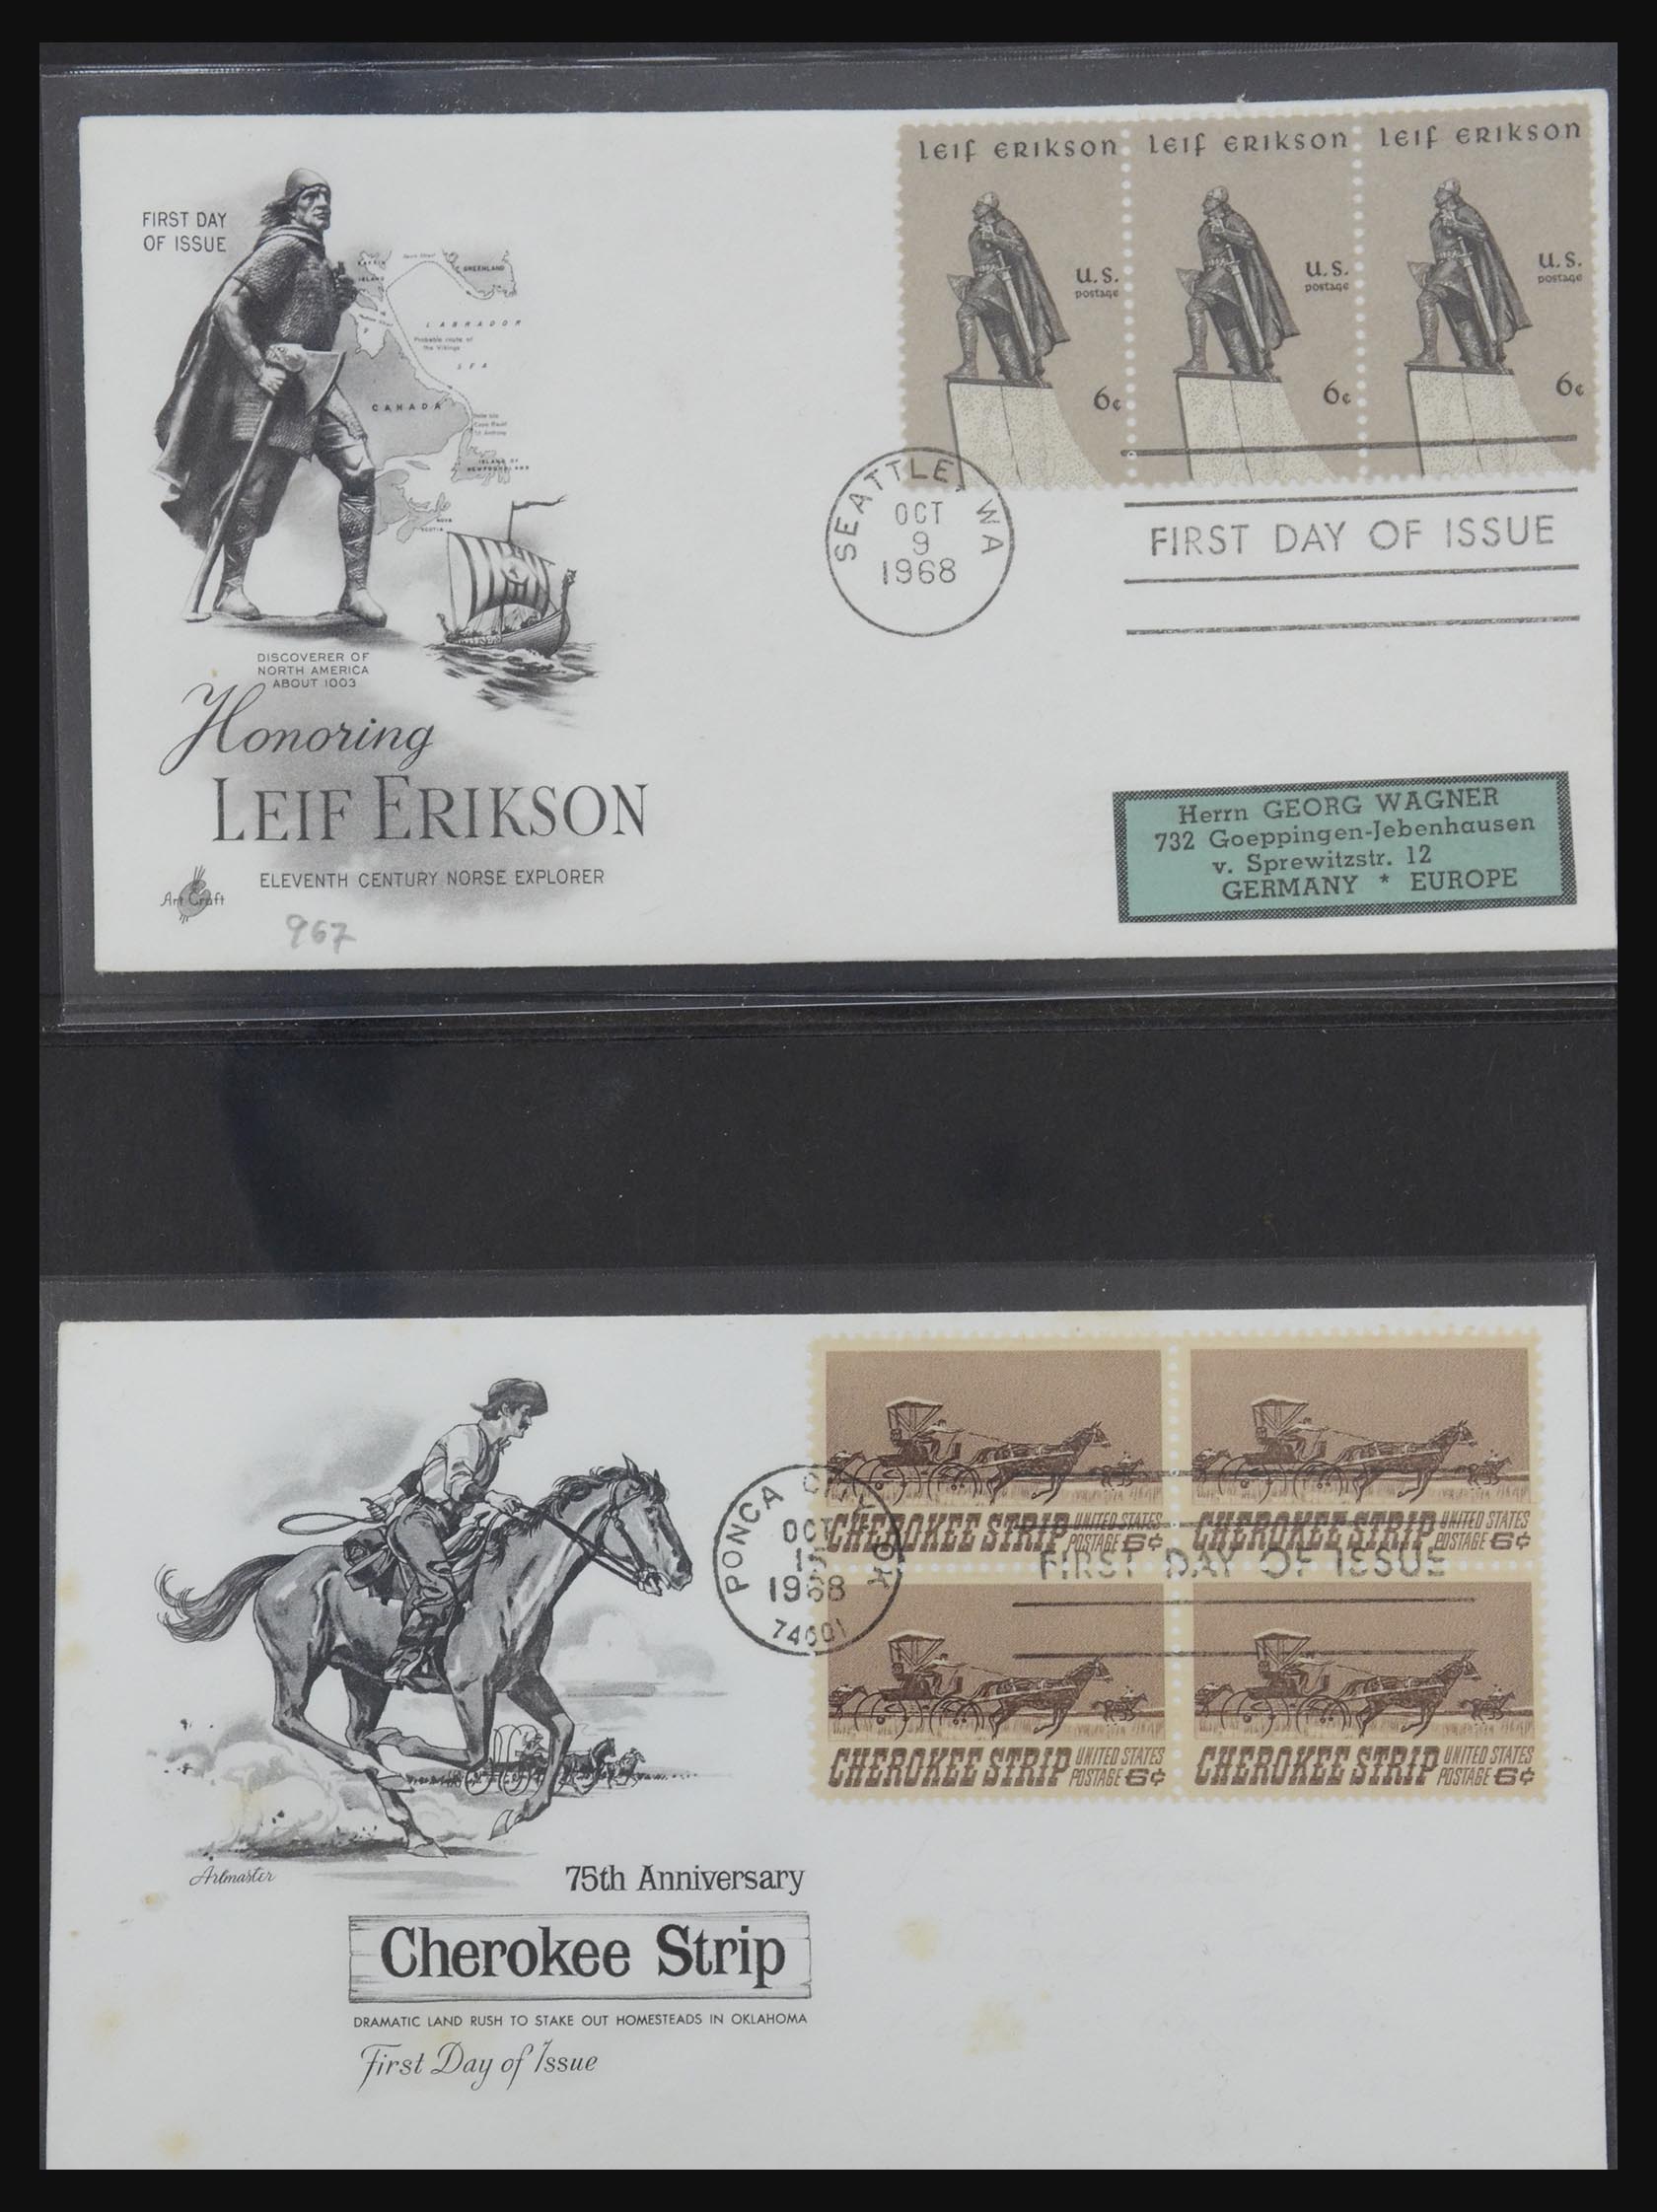 31913 0066 - 31913 USA first day cover collection 1945-1990.